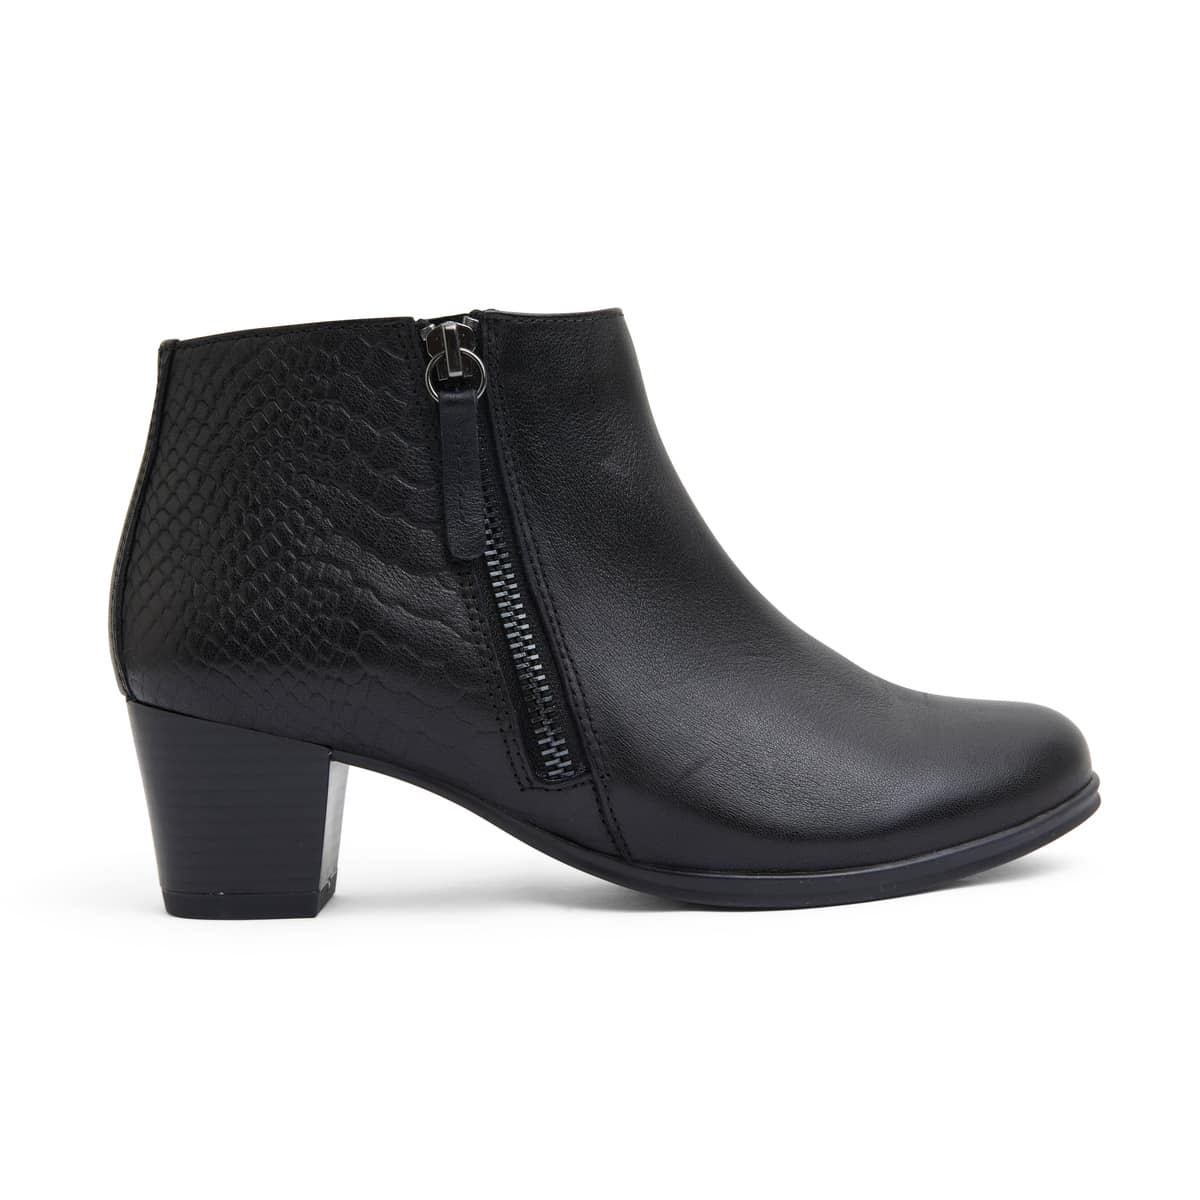 Beckett Boot in Black Leather